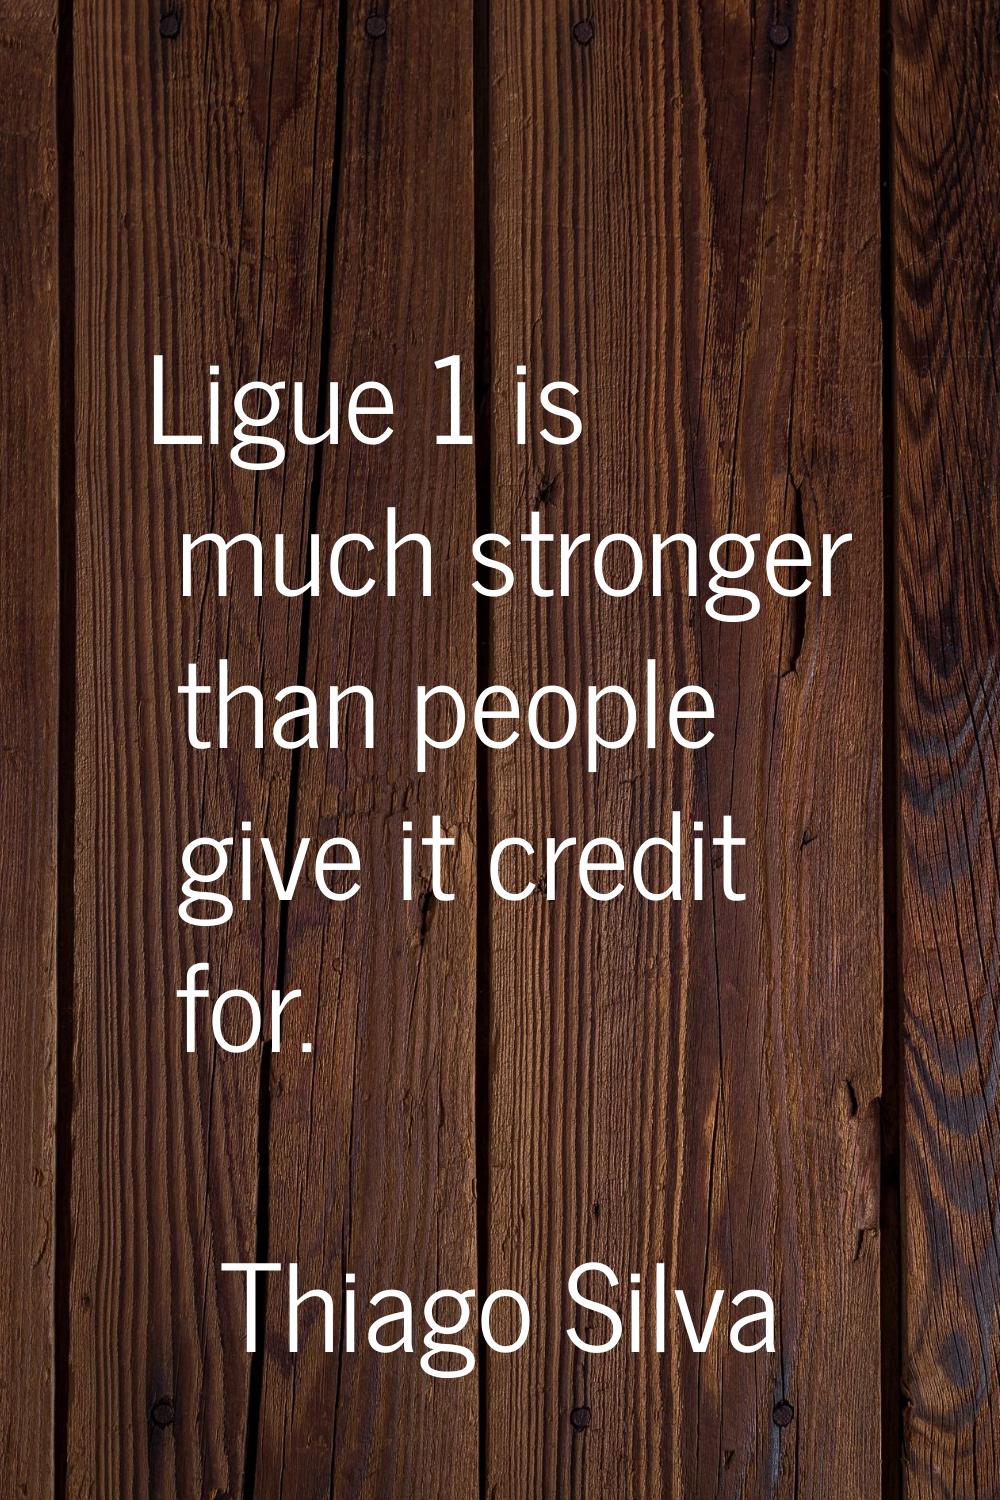 Ligue 1 is much stronger than people give it credit for.